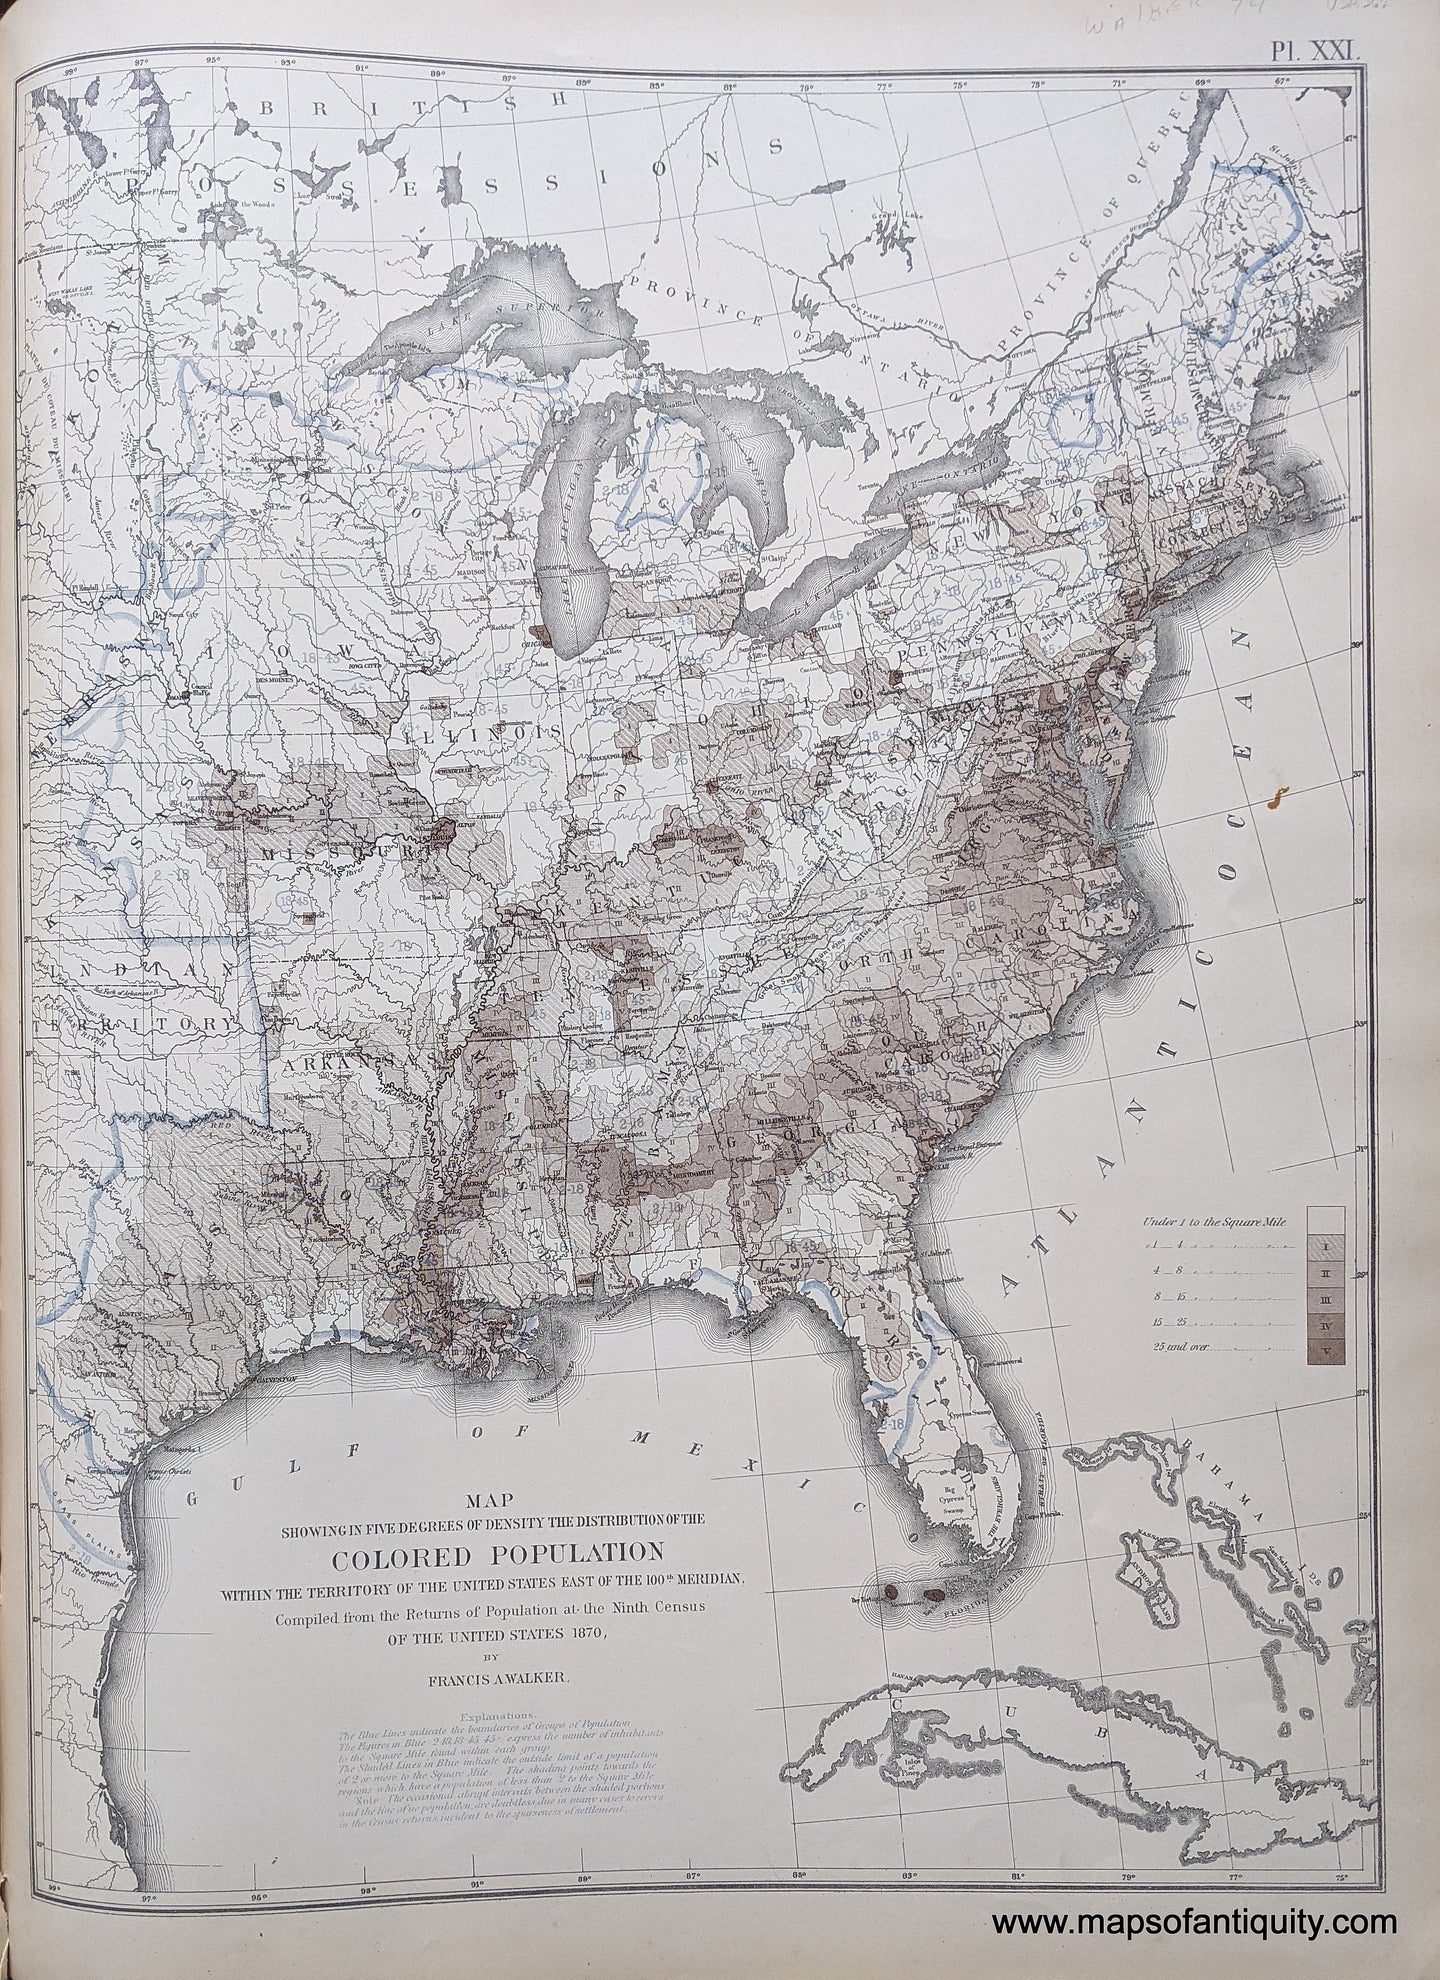 Genuine-Antique-Map-Map-Showing-in-Five-Degrees-of-Density-the-Distribution-of-the-Colored-Population-within-the-Territory-of-the-United-States-East-of-the-100th-Meridian.-United-States--1874-Walker-/-Bien-Maps-Of-Antiquity-1800s-19th-century